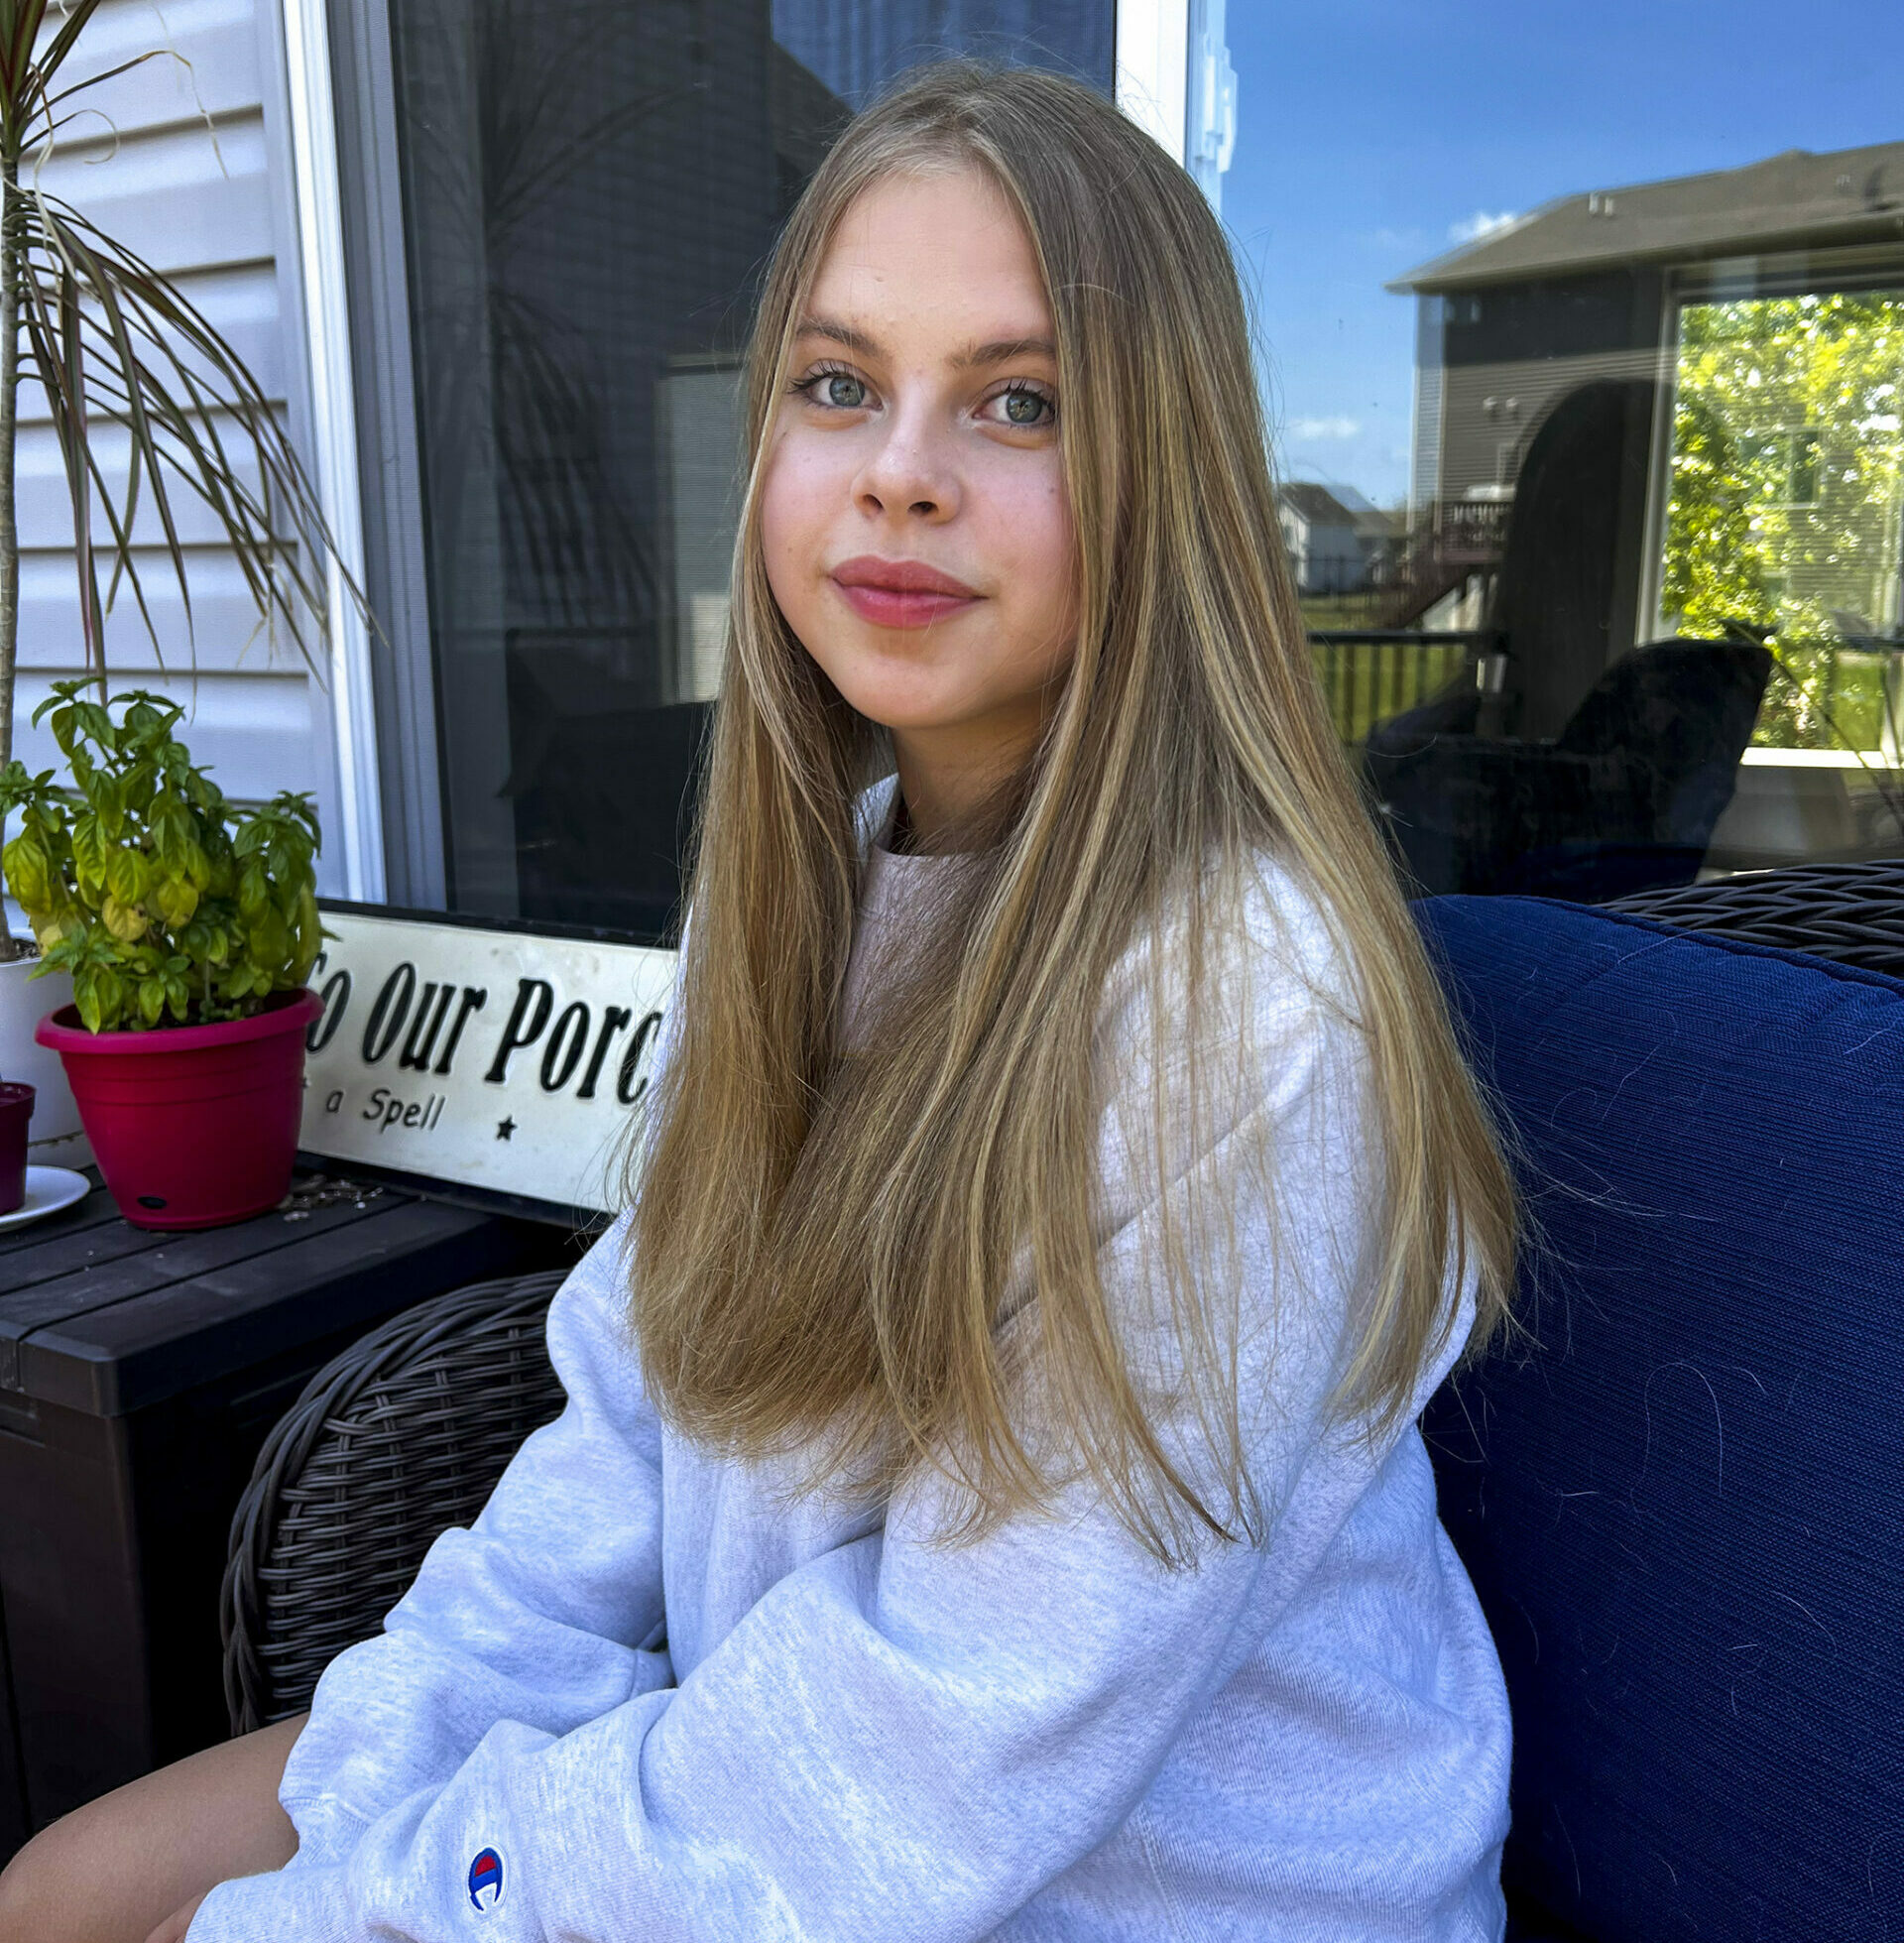 Liza sits on porch furniture in her backyard. She looks at the camera with a slight smile and wears a gray sweatshirt.